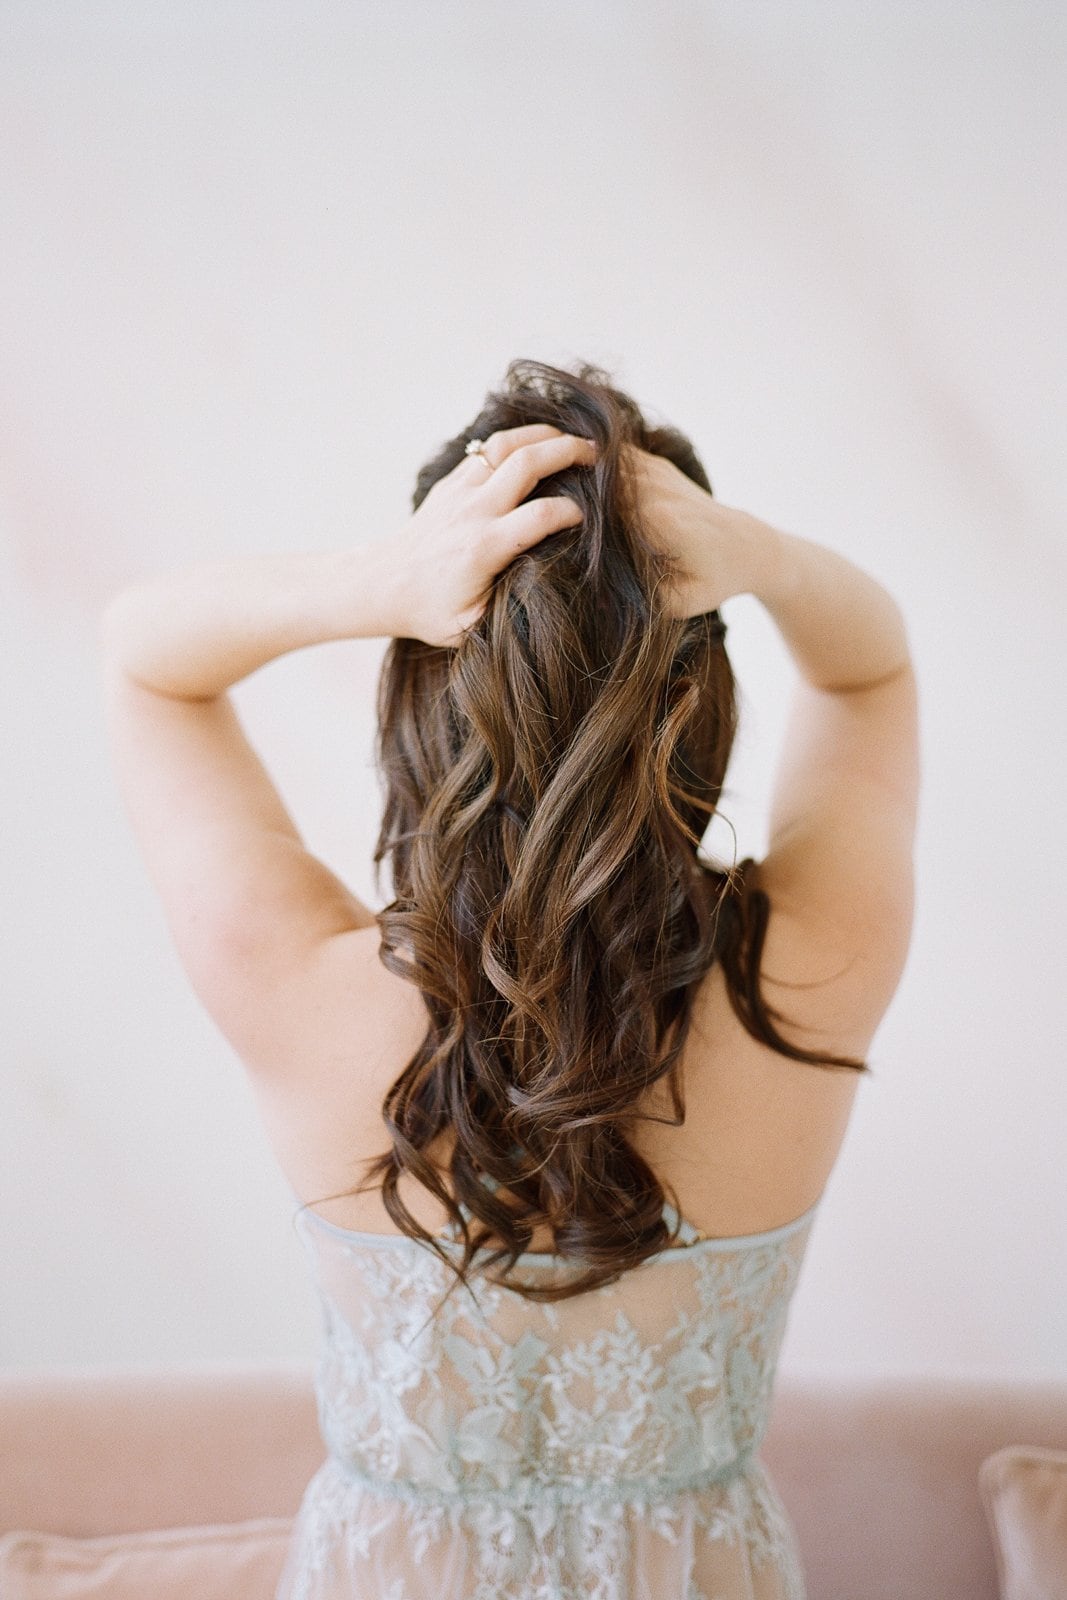 photo of the back of a woman and her hands through her hair: Pittsburgh Boudoir Photography